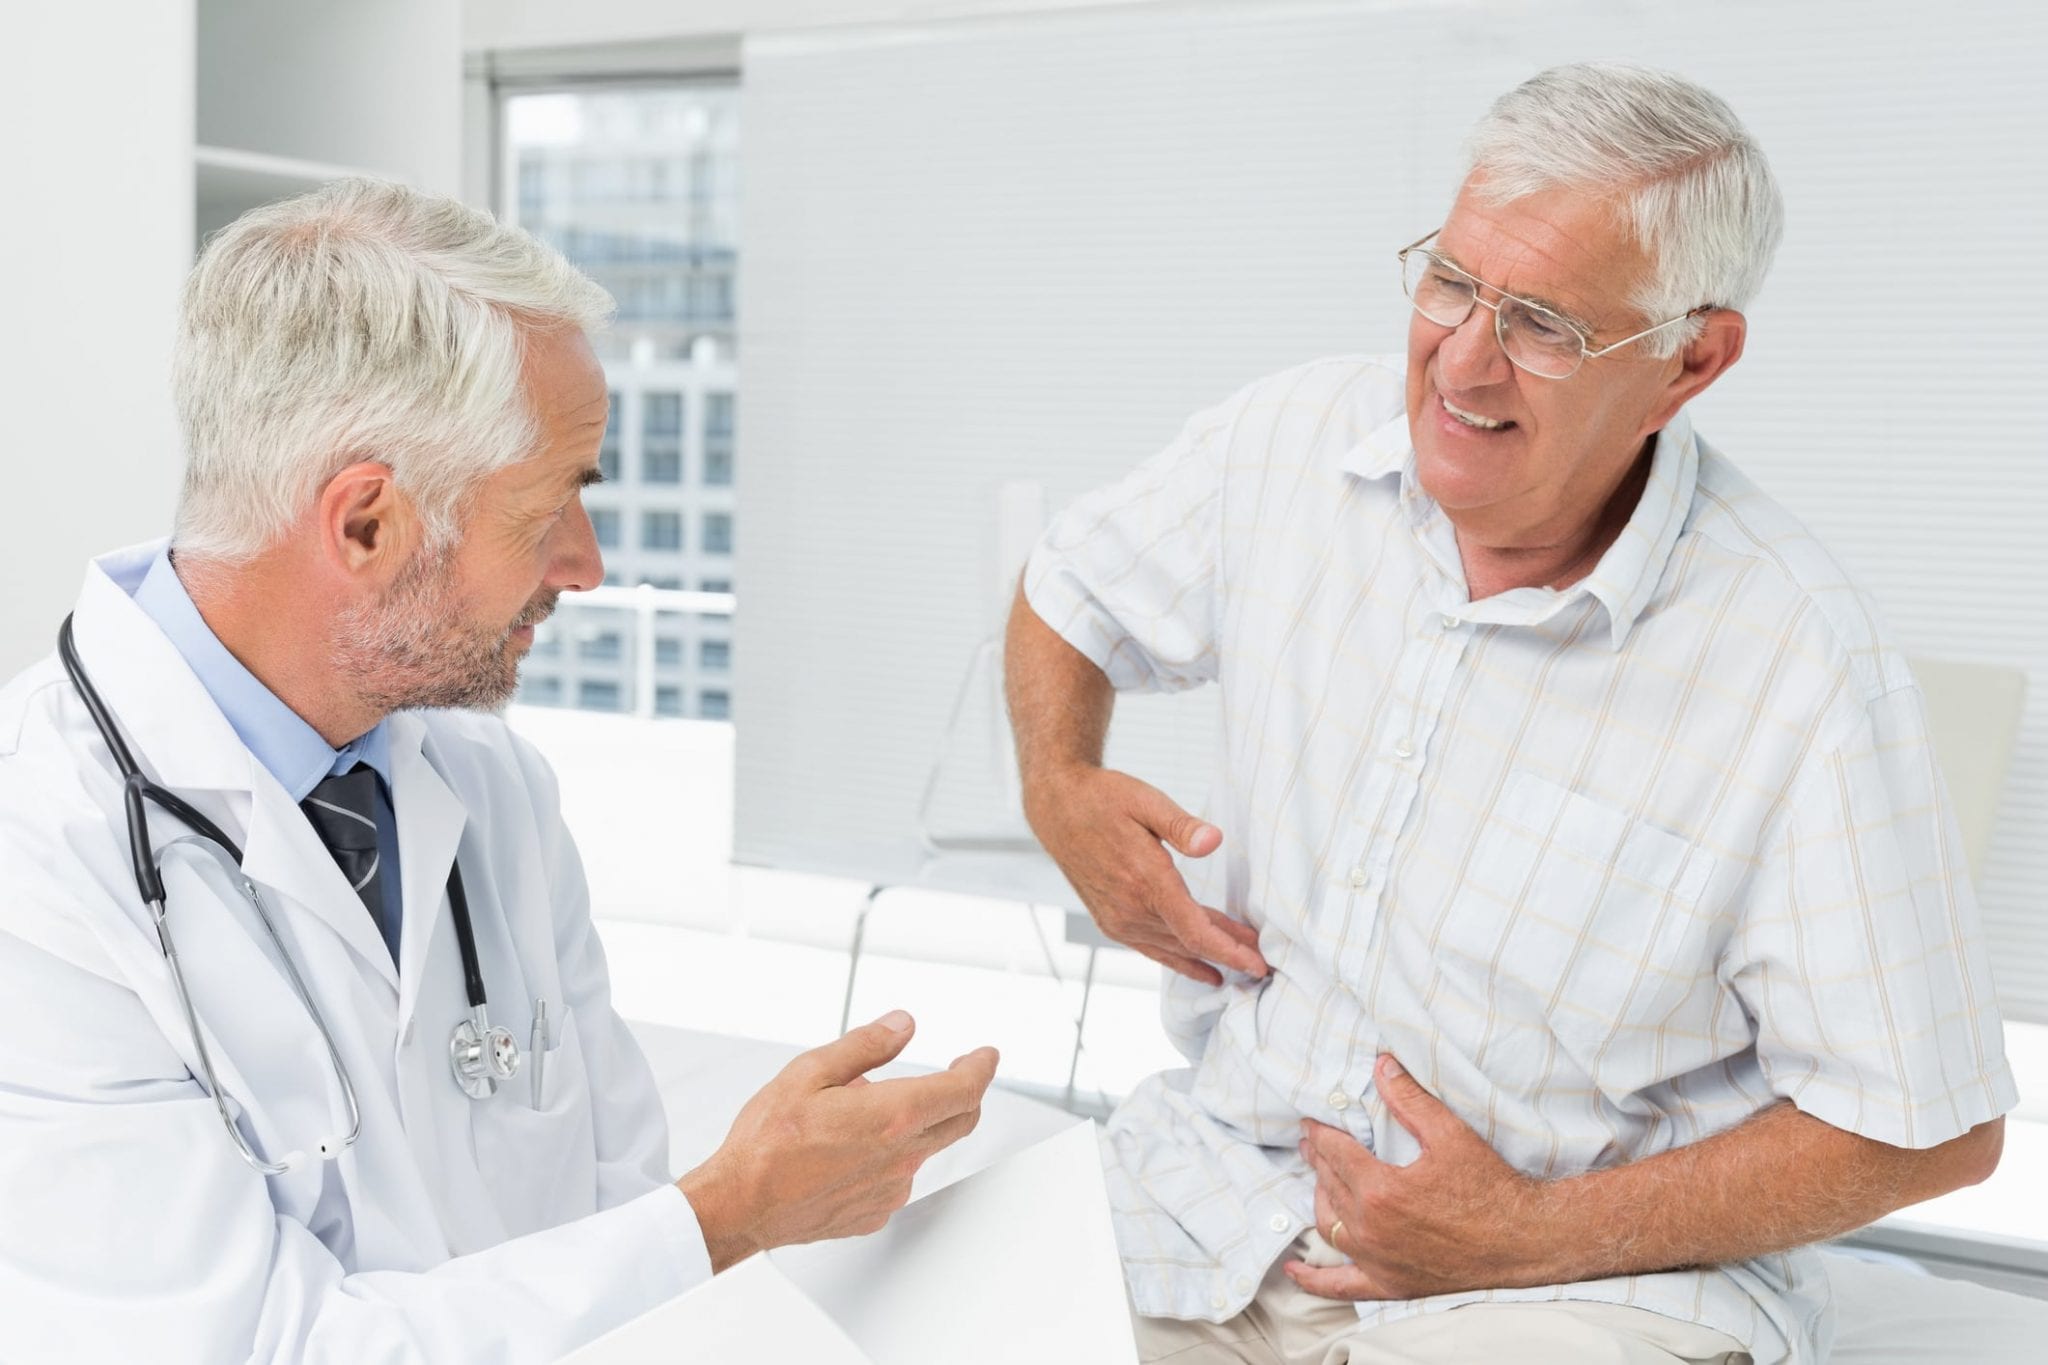 Patient Pointing To Abdomen At Doctor’s Office